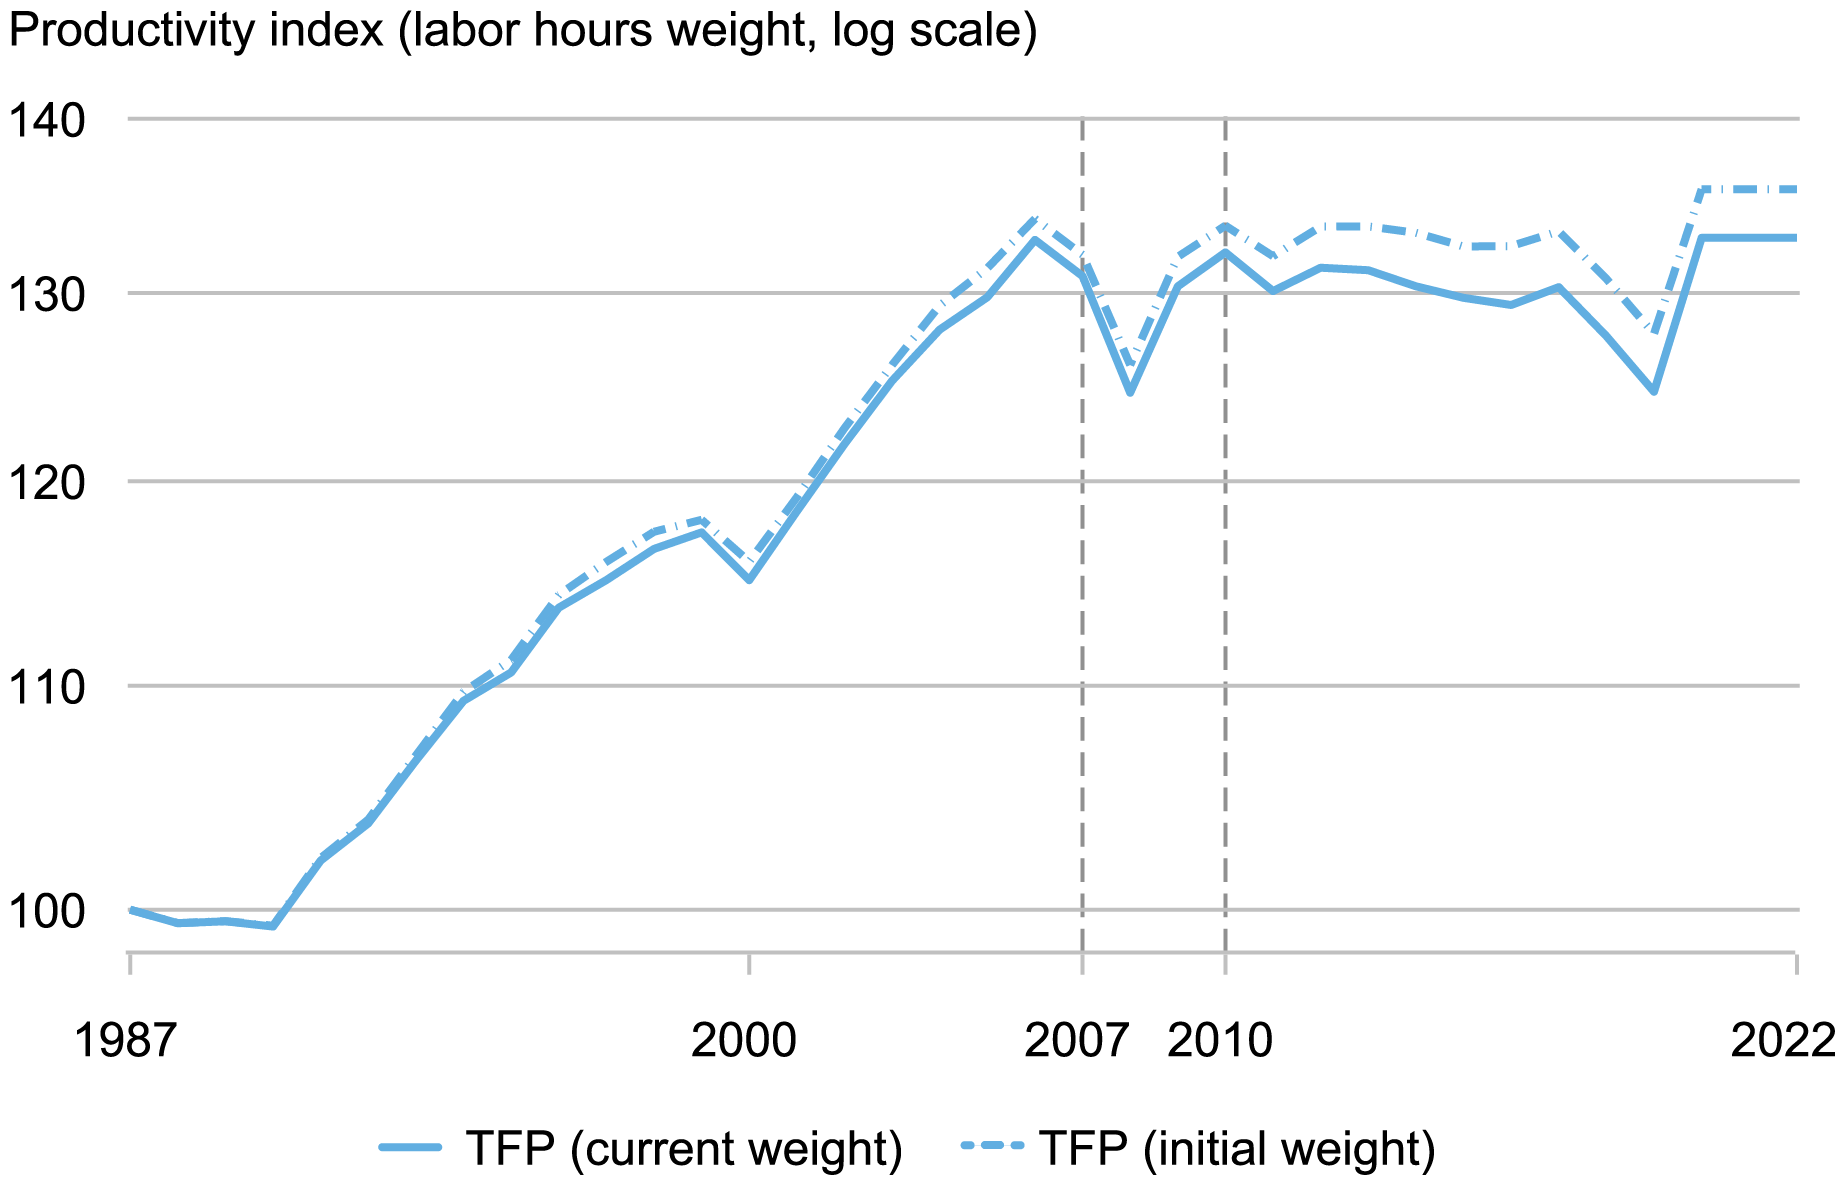 line chart tracking labor productivity index from 1987 to 2022 for total factor productivity (TFP)  in current weight (blue solid) and initial rate using 1987 values (blue dotted)